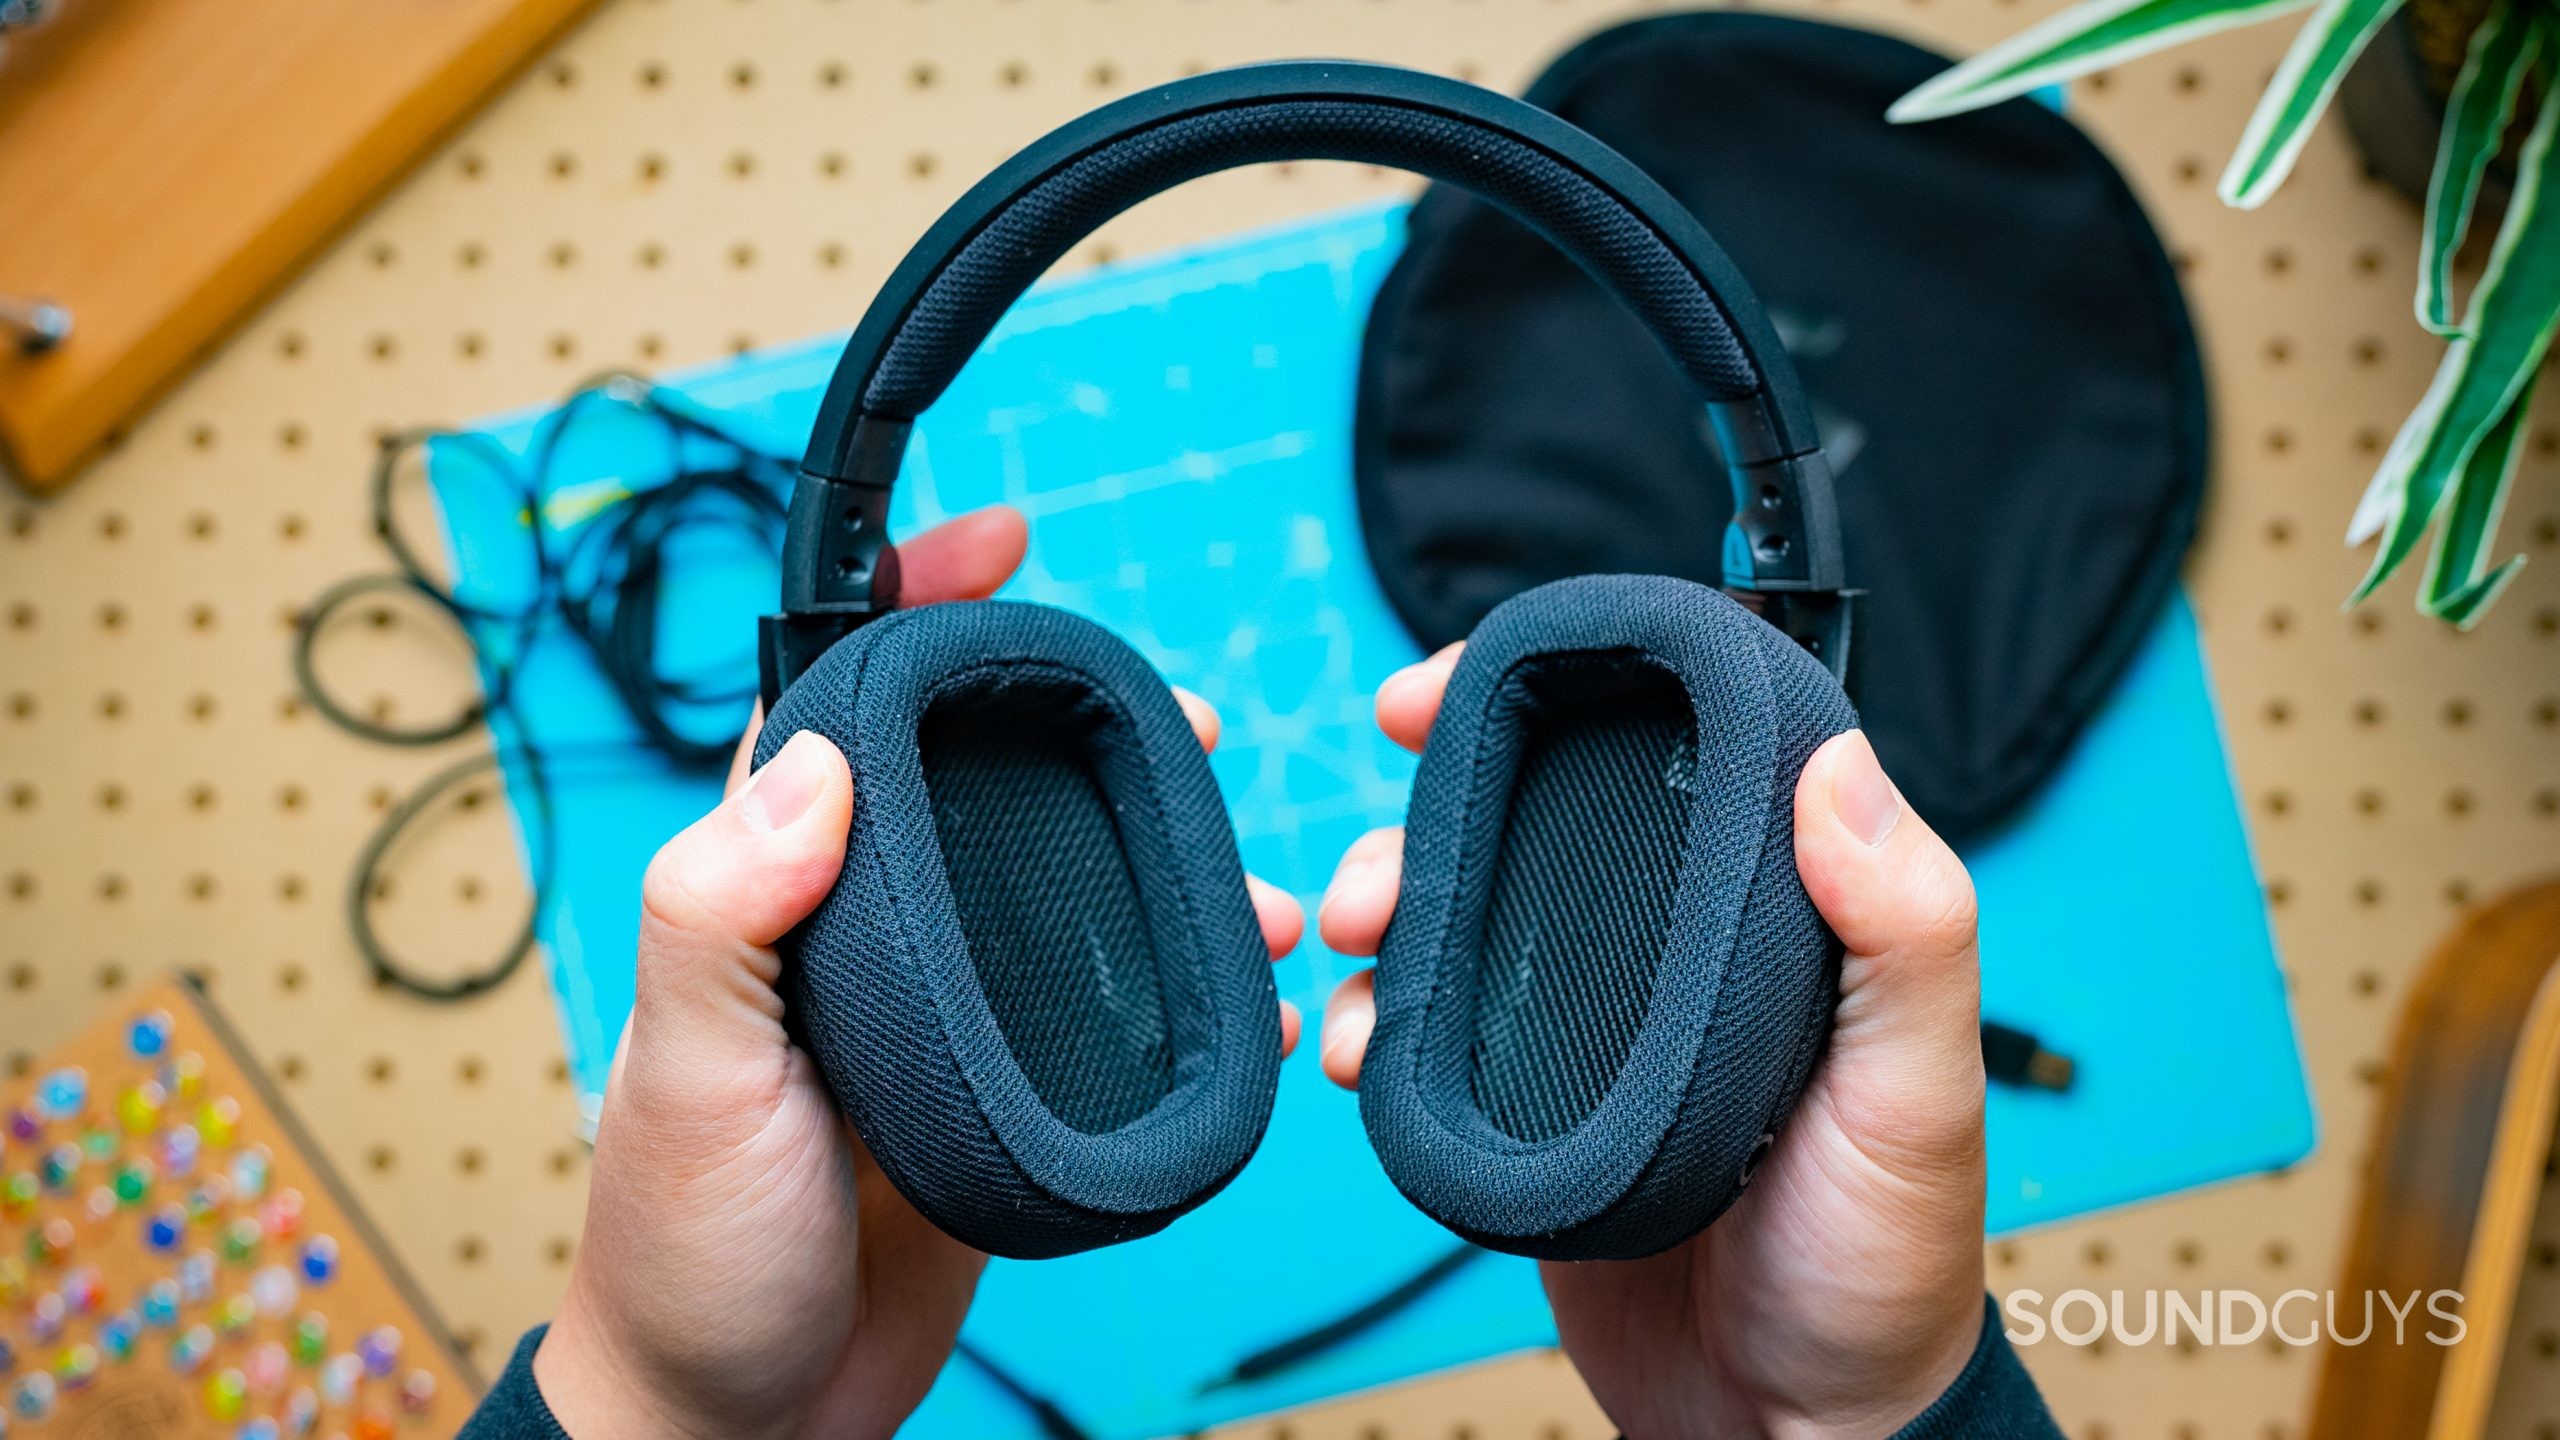 The Logitech G433 being held in two hands with a blue surface behind it.